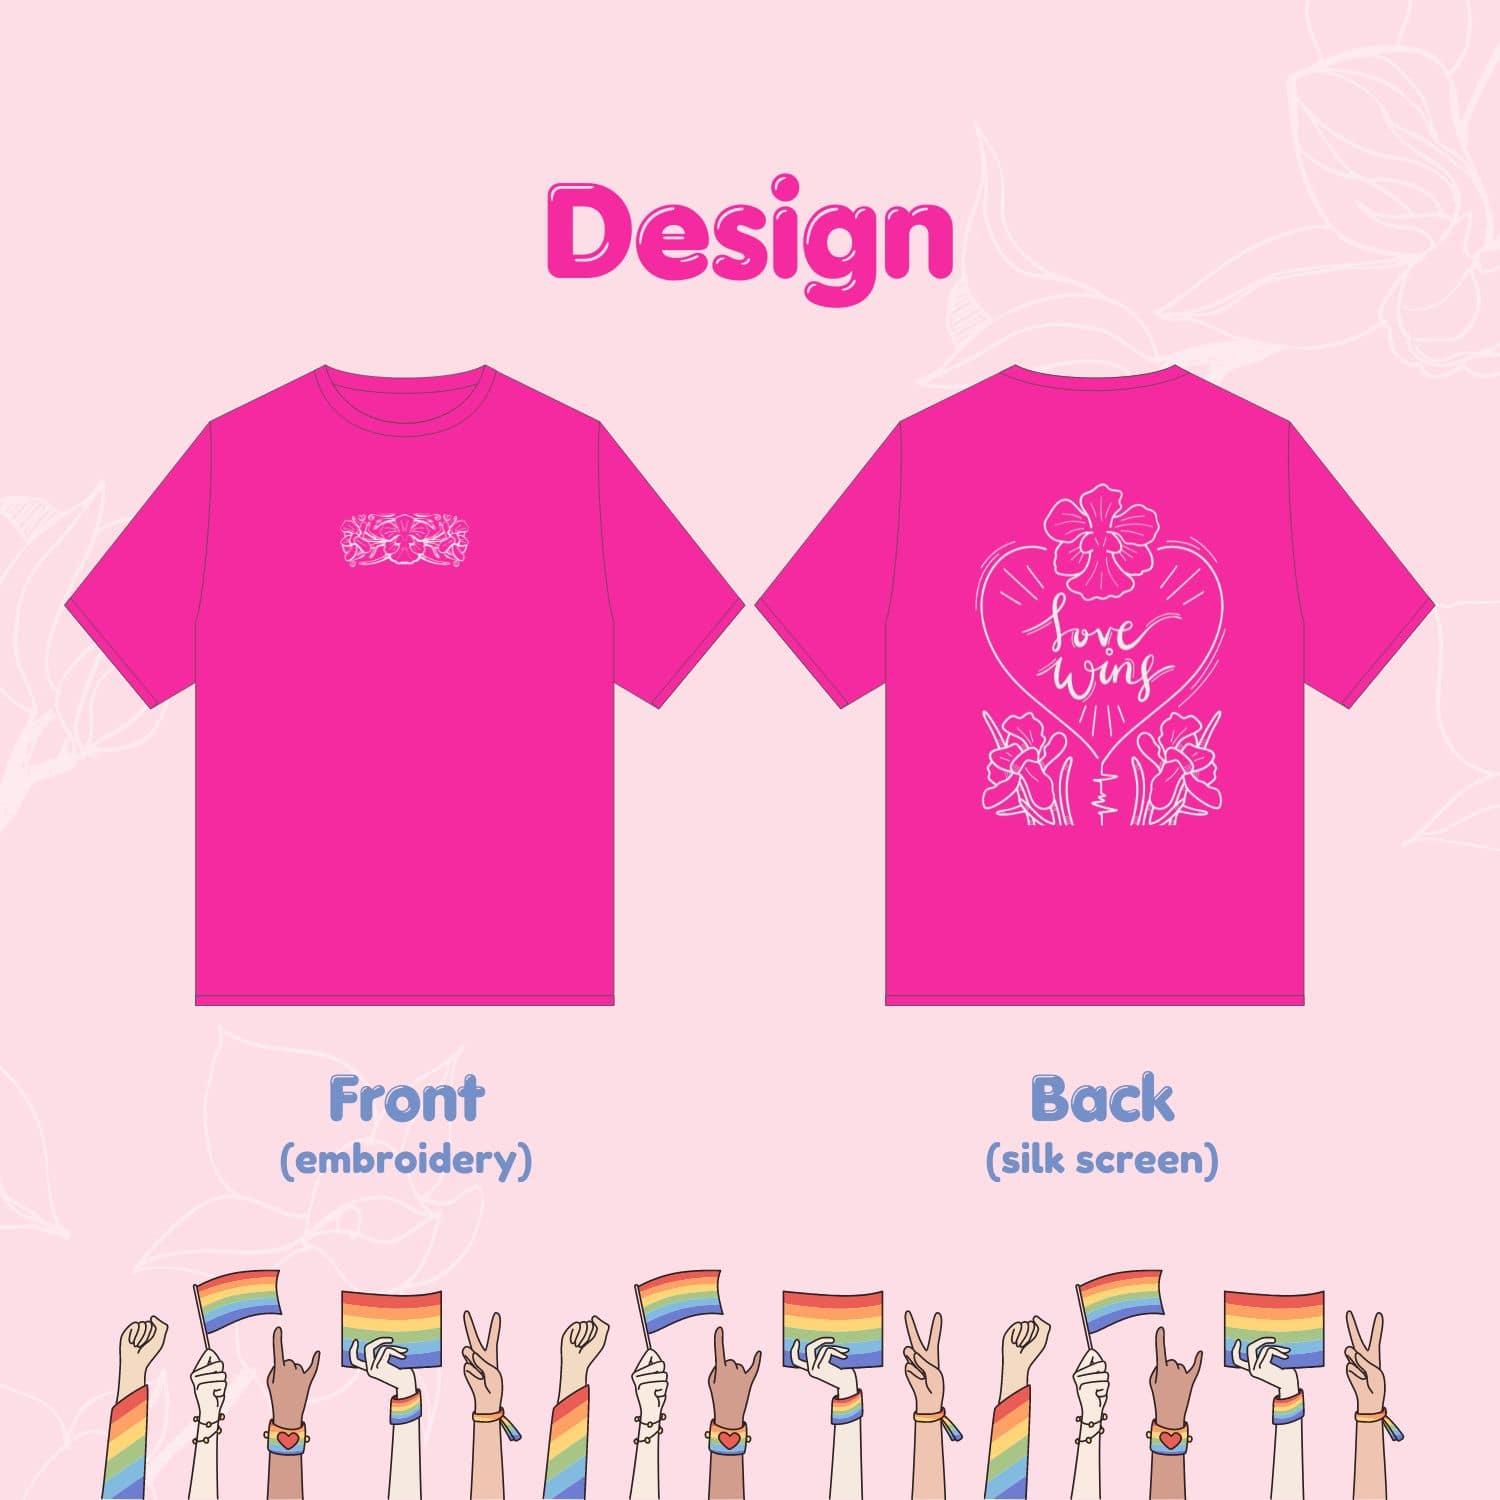 Explore the full TOMSCOUT Flourish Design from the LGBT Pride Kits, exclusive to Singapore. This detailed t-shirt showcases a creative and sustainable design on both the front and back, exemplifying the complete look of LGBT pride and fashion.